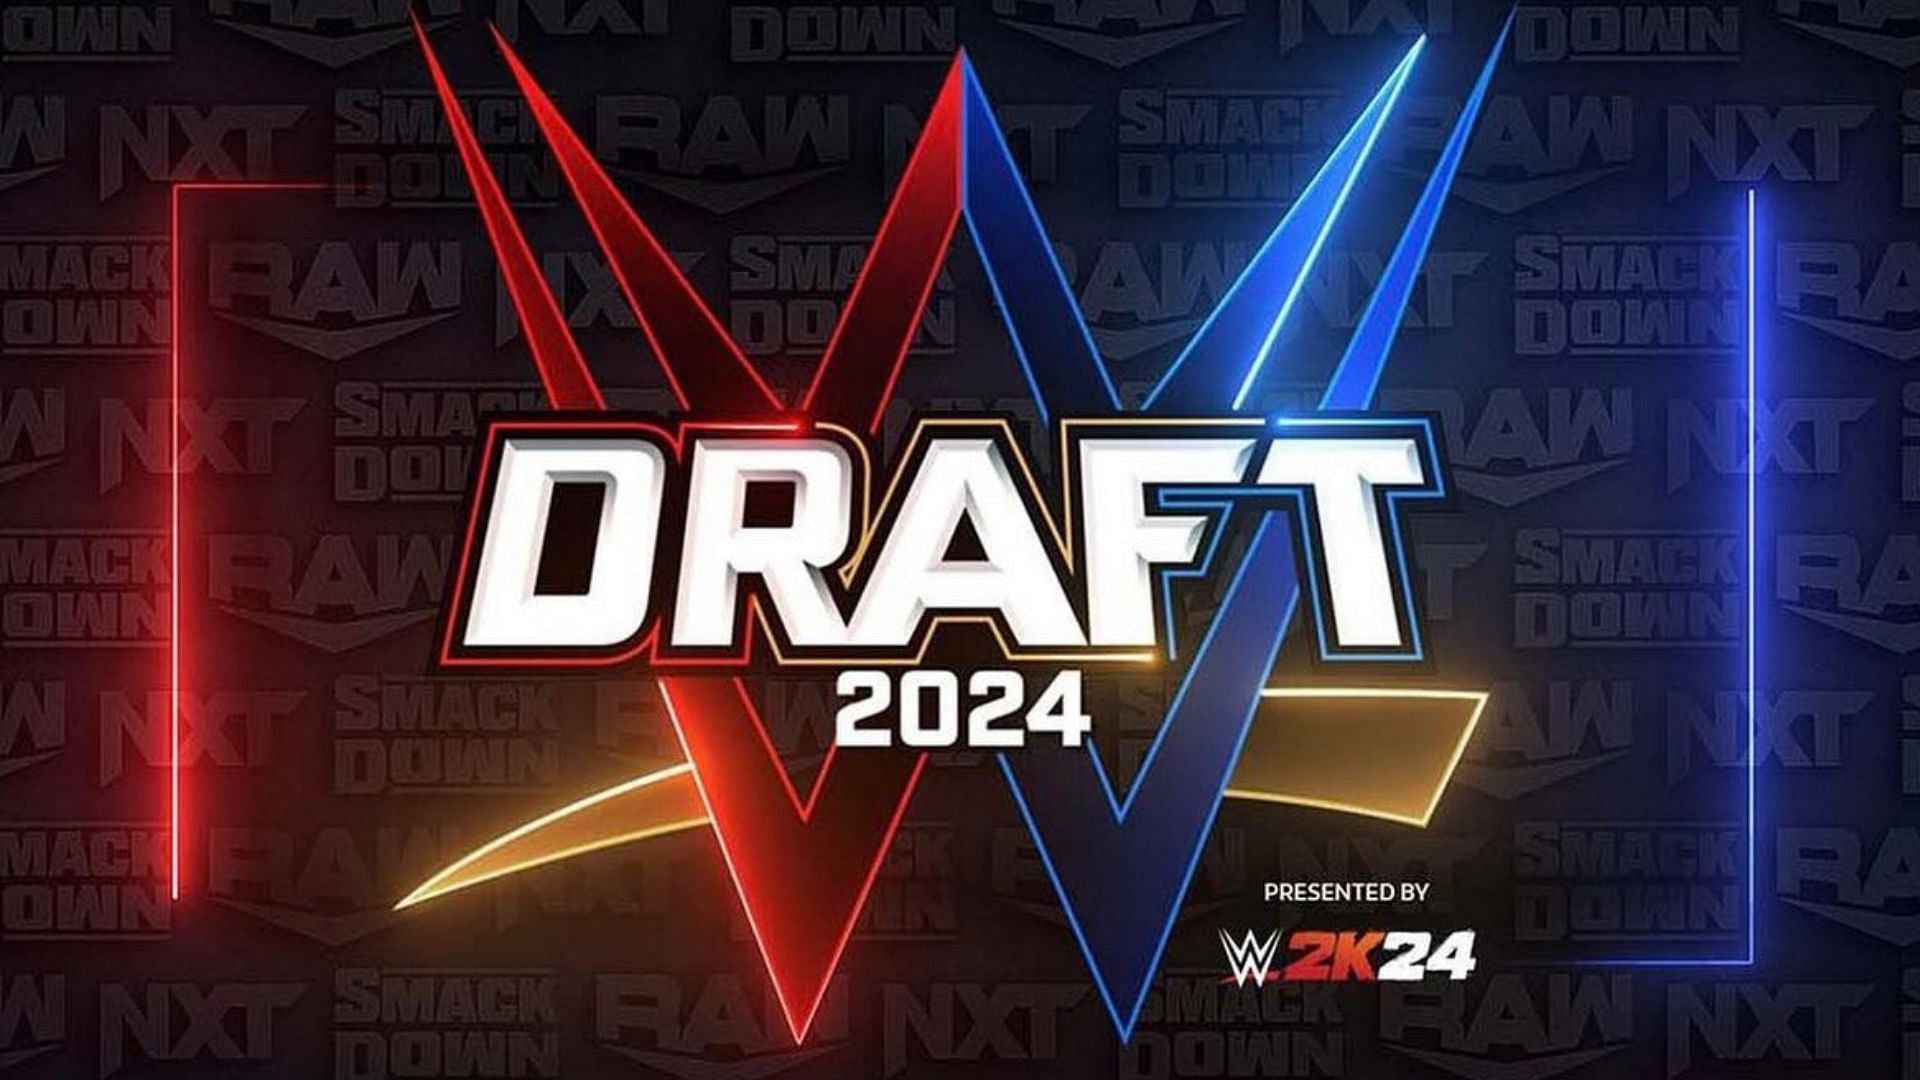 WWE Draft will take place at the end of April 2024!